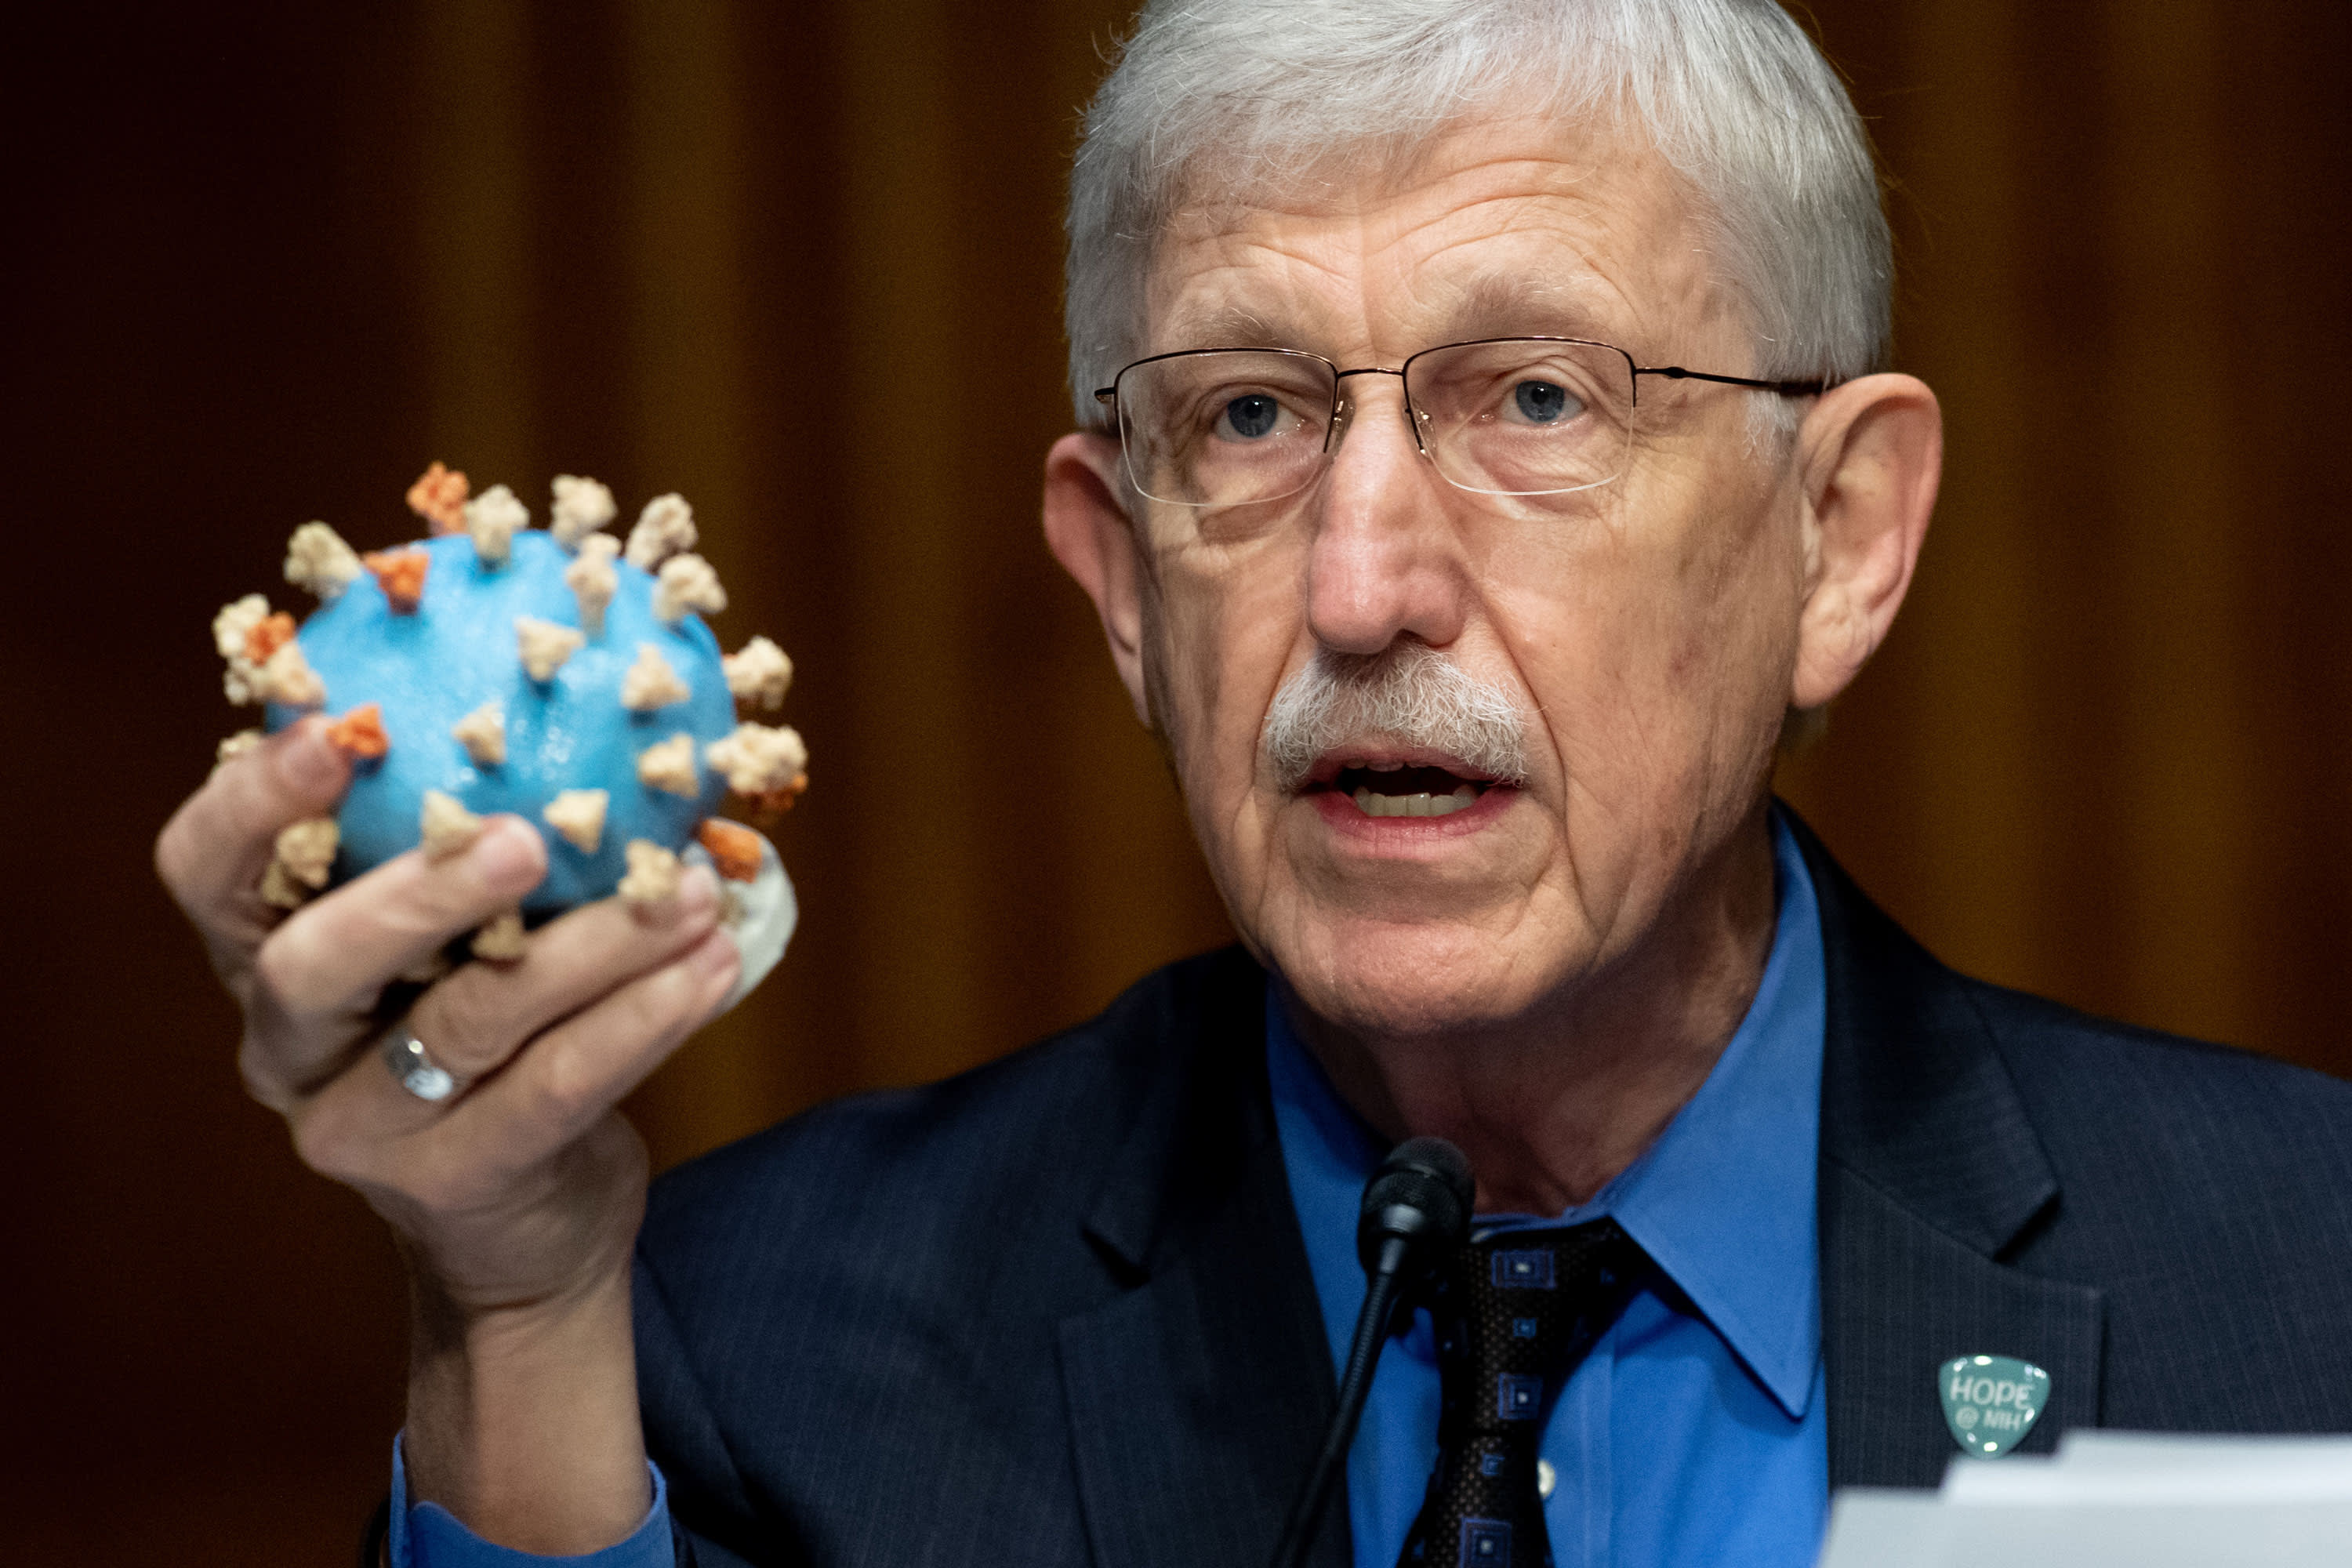 National Institutes of Health Director Dr. Francis Collins is stepping down by year’s end